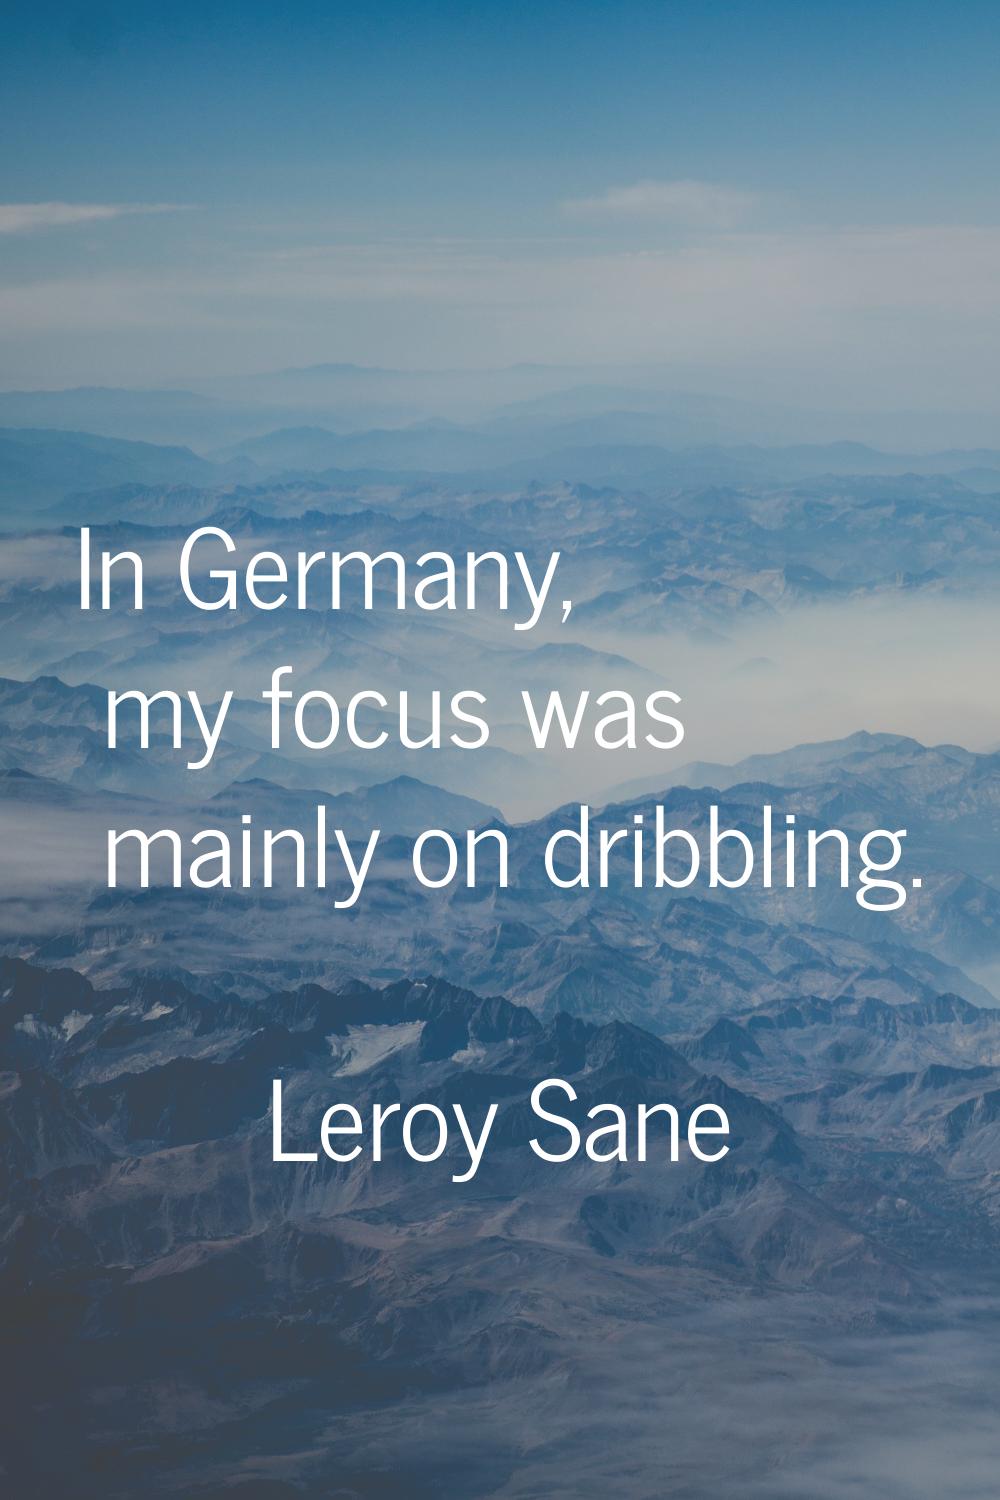 In Germany, my focus was mainly on dribbling.